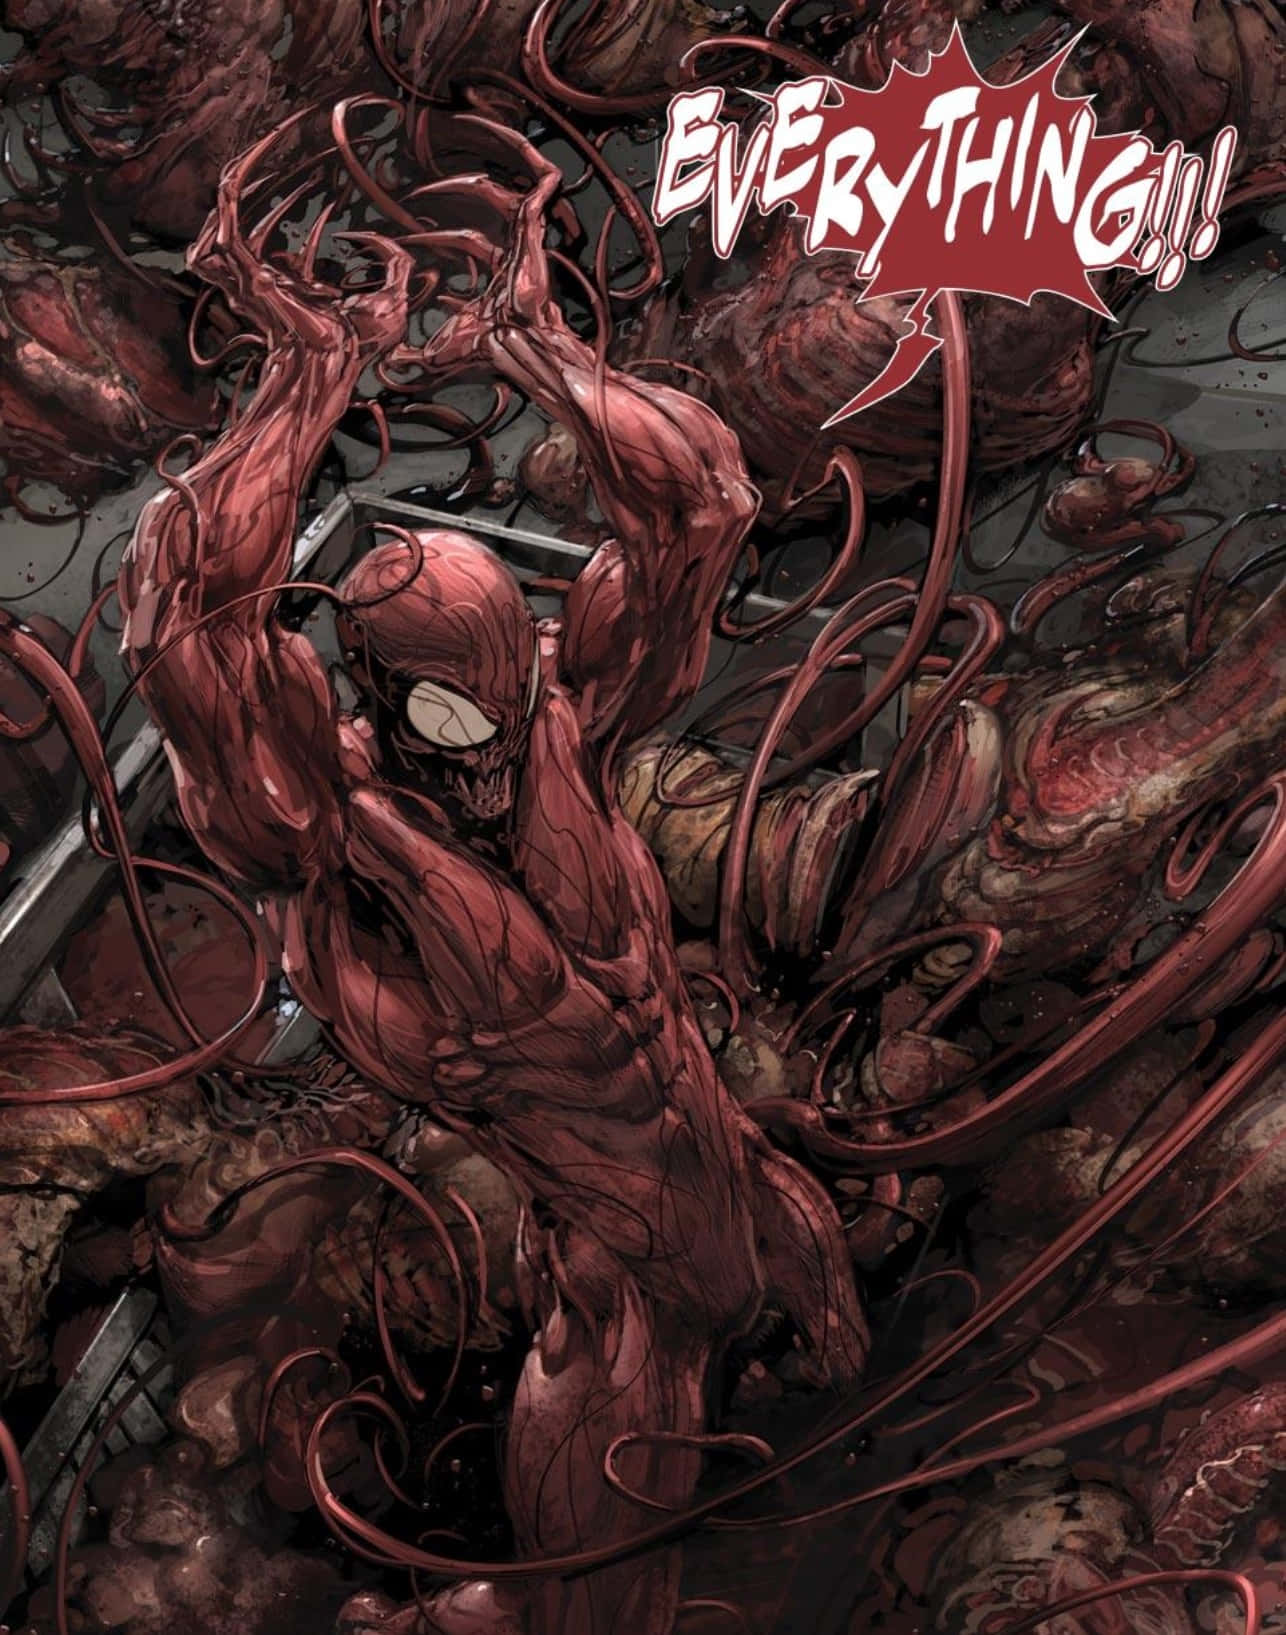 An intense Carnage USA artwork featuring Carnage and other Marvel characters Wallpaper